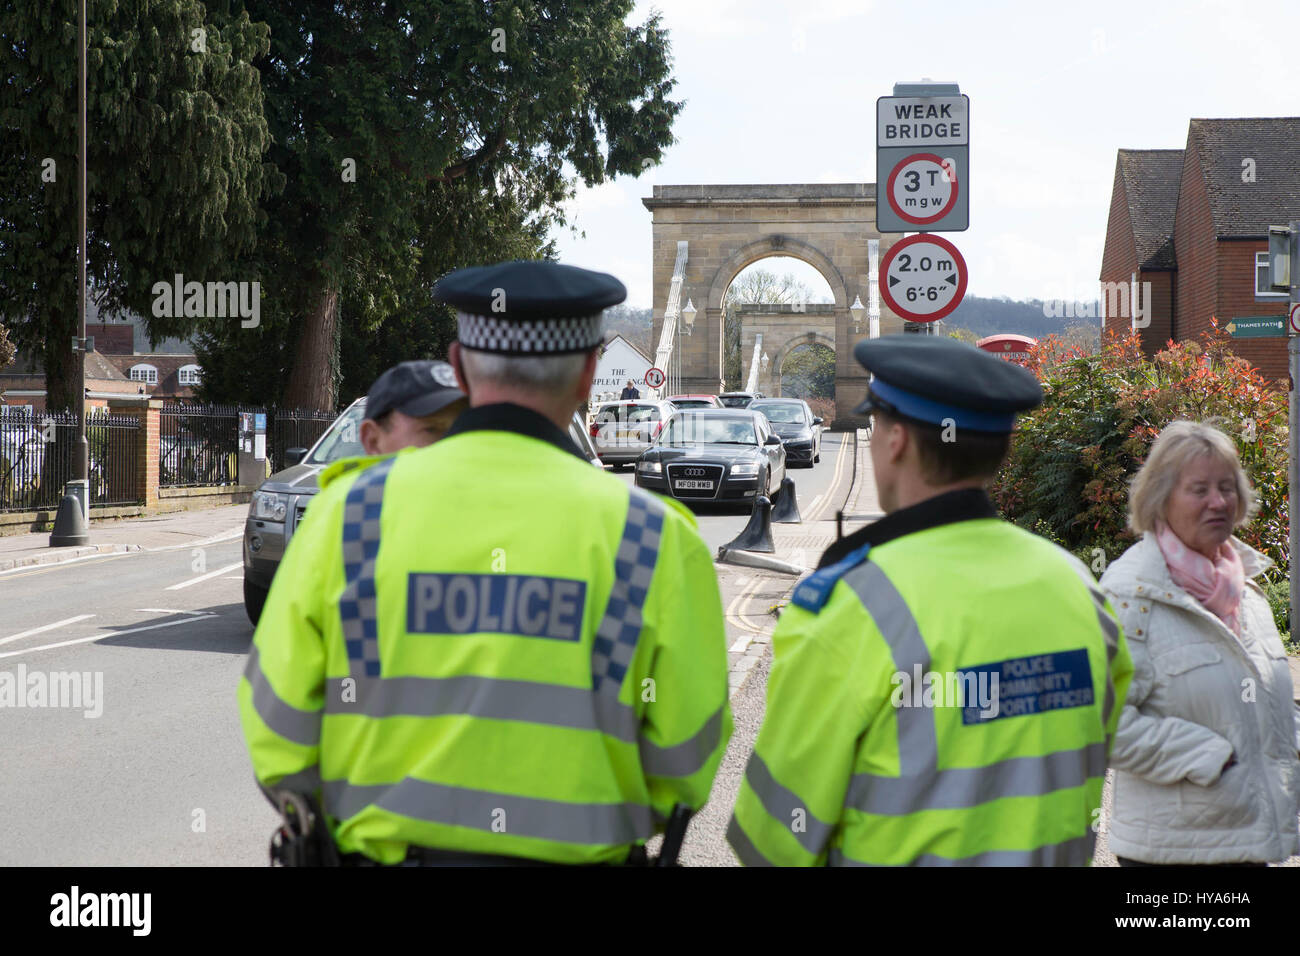 Marlow, Buckinghamshire, UK. 2nd Apr, 2017. Thames vally police enforce the weight limit on the week bridge in Marlow Buck police officer watching the traffic across the bridge Credit: Brian Southam/Alamy Live News Stock Photo